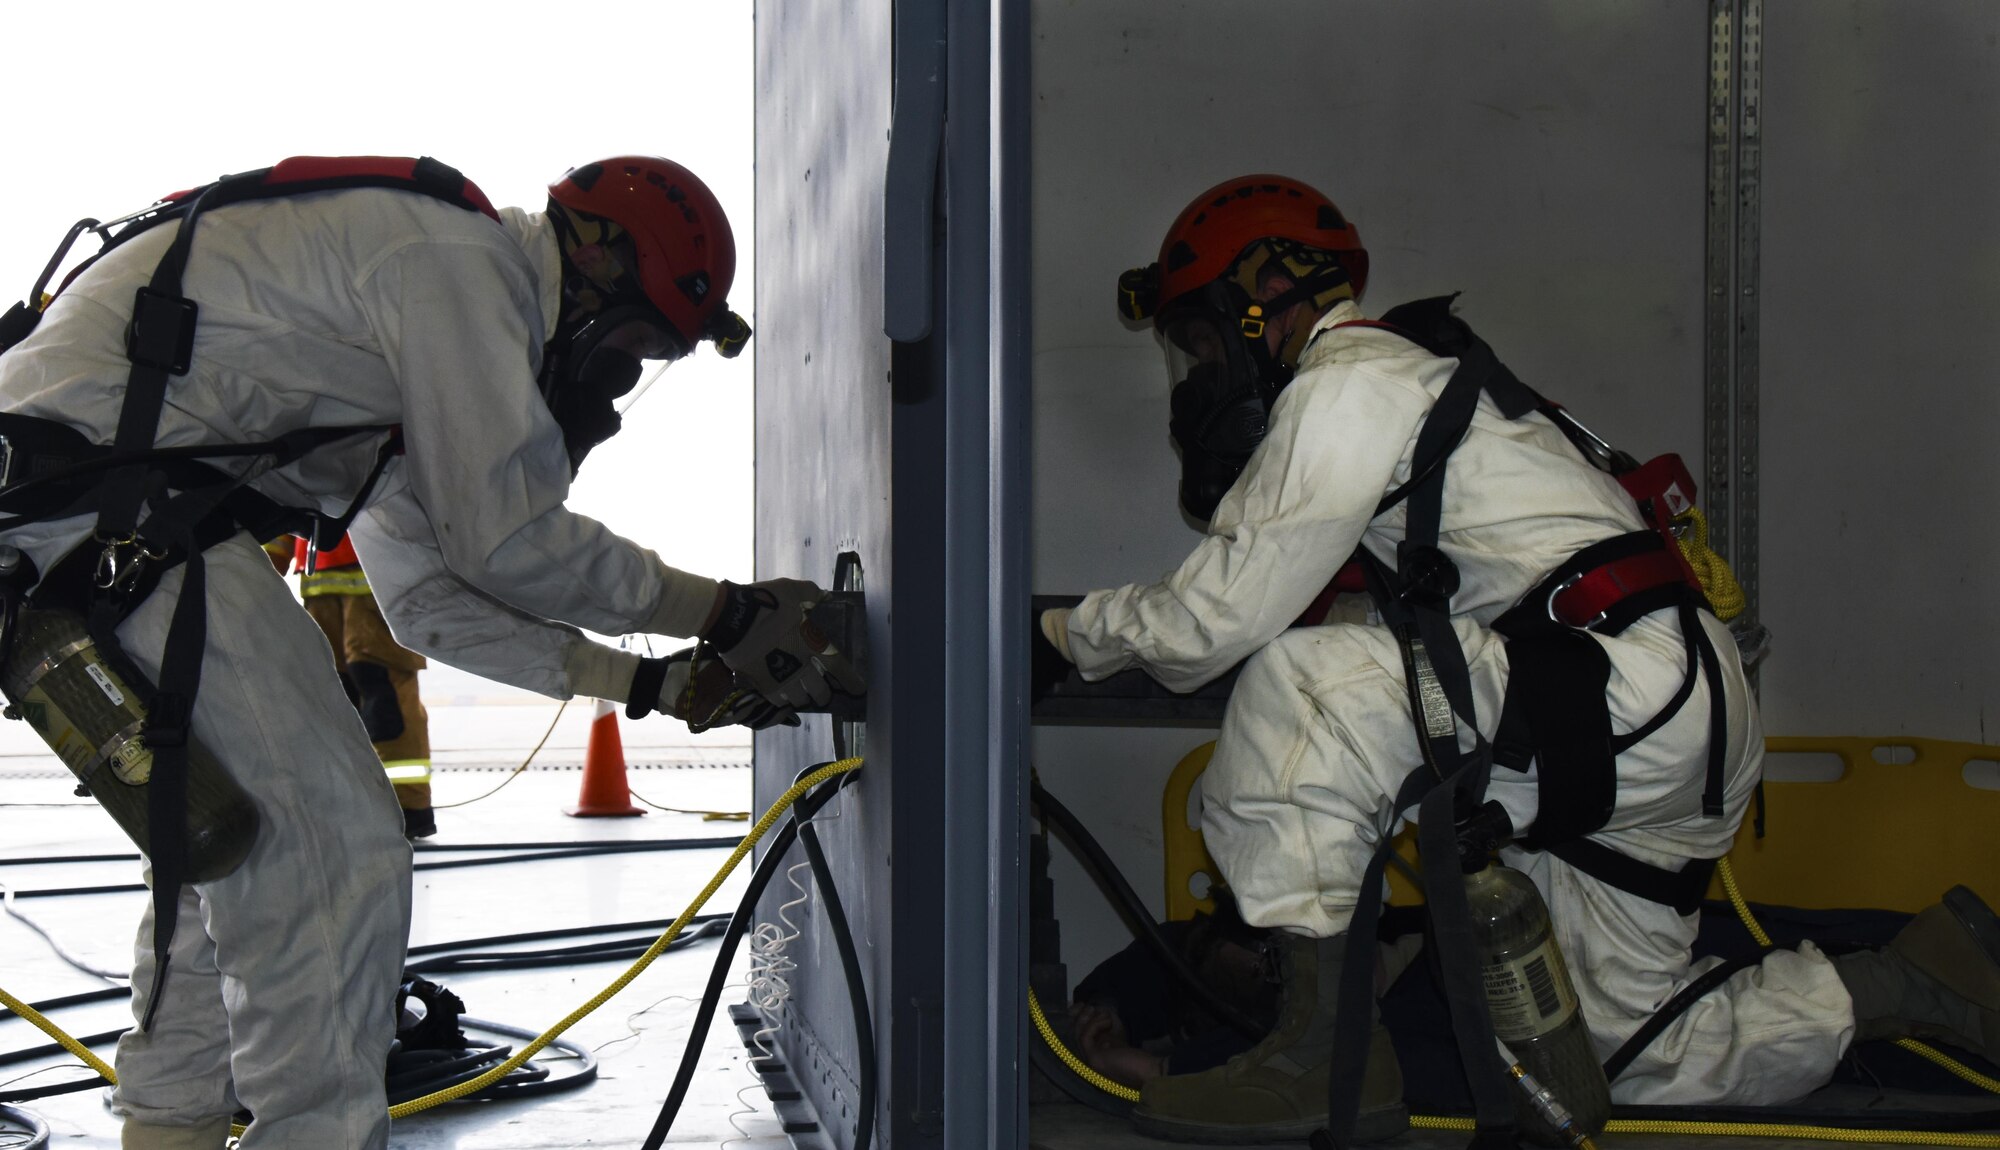 U.S. Air Force rescue crew Airmen with the 379th Expeditionary Civil Engineer Squadron Fire Department extract a role player simulating a technician being trapped in a fuel cell during a confined space training exercise at Al Udeid Air Base, Qatar, April 14, 2017. Rescue crew Airmen maintain their readiness with training exercises to mitigate possible mishaps. (U.S. Air Force photo by Senior Airman Cynthia A. Innocenti)